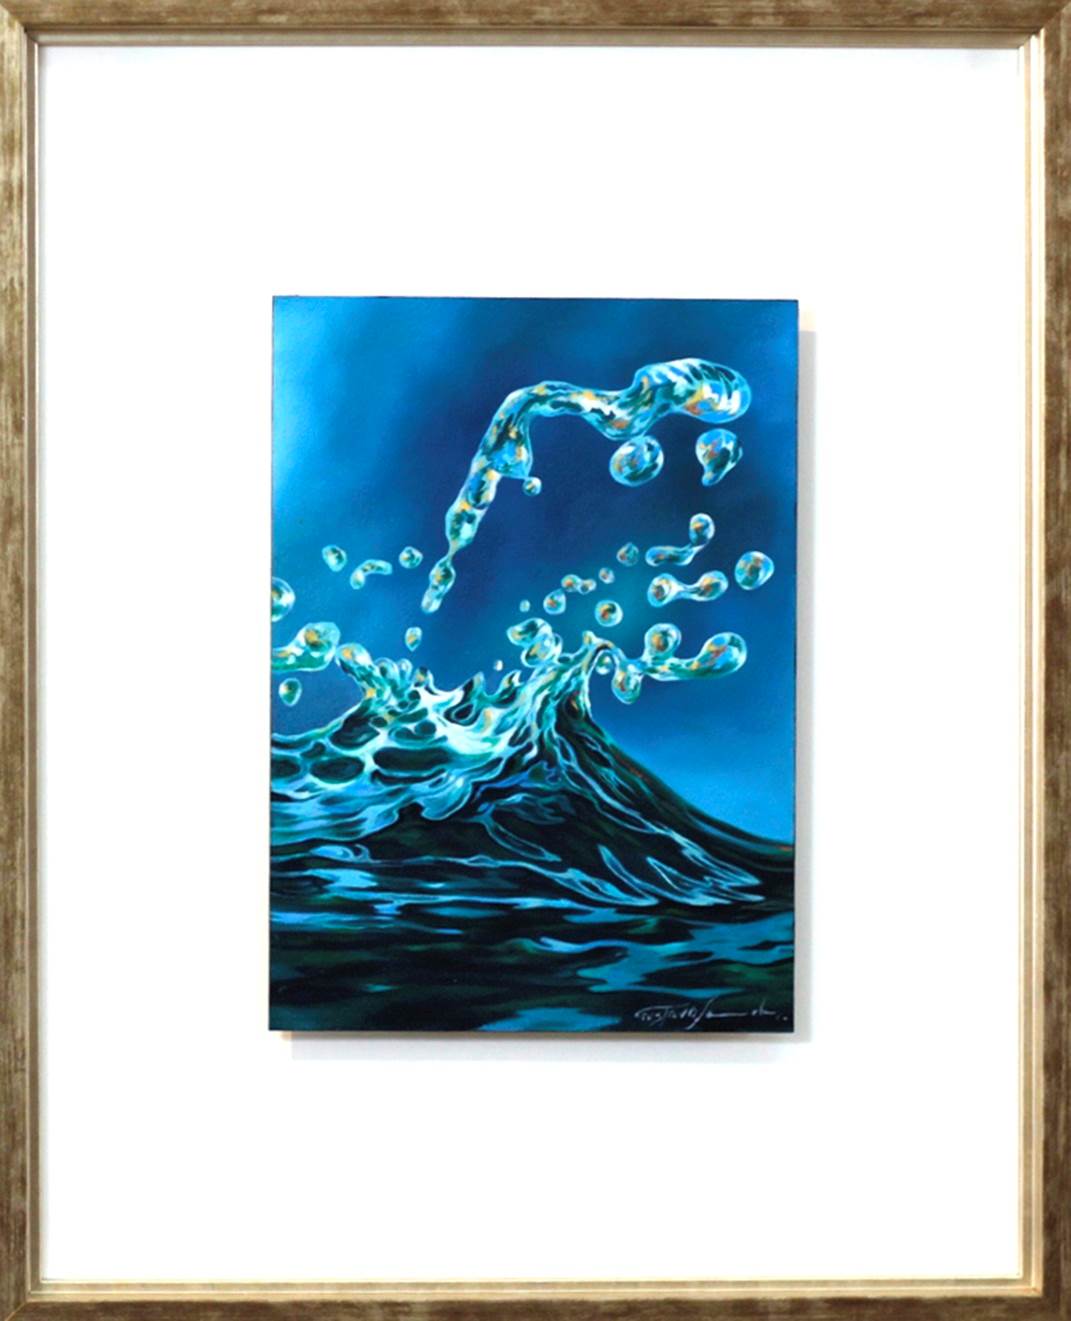 Oceano pacífico II, original Nature Oil Painting by Gustavo Fernandes